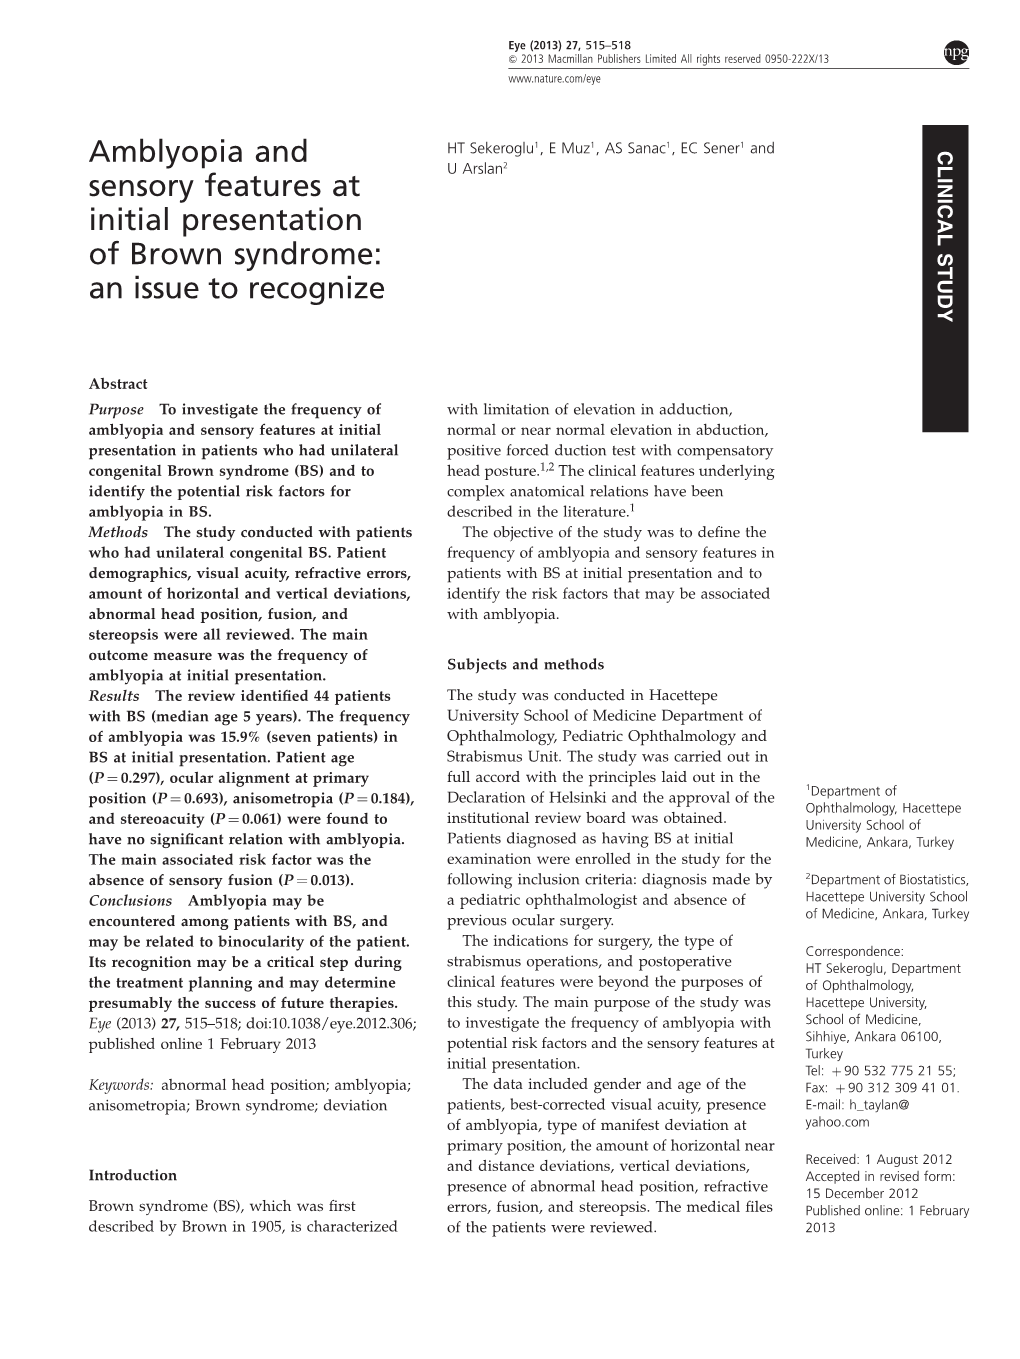 Amblyopia and Sensory Features at Initial Presentation Of